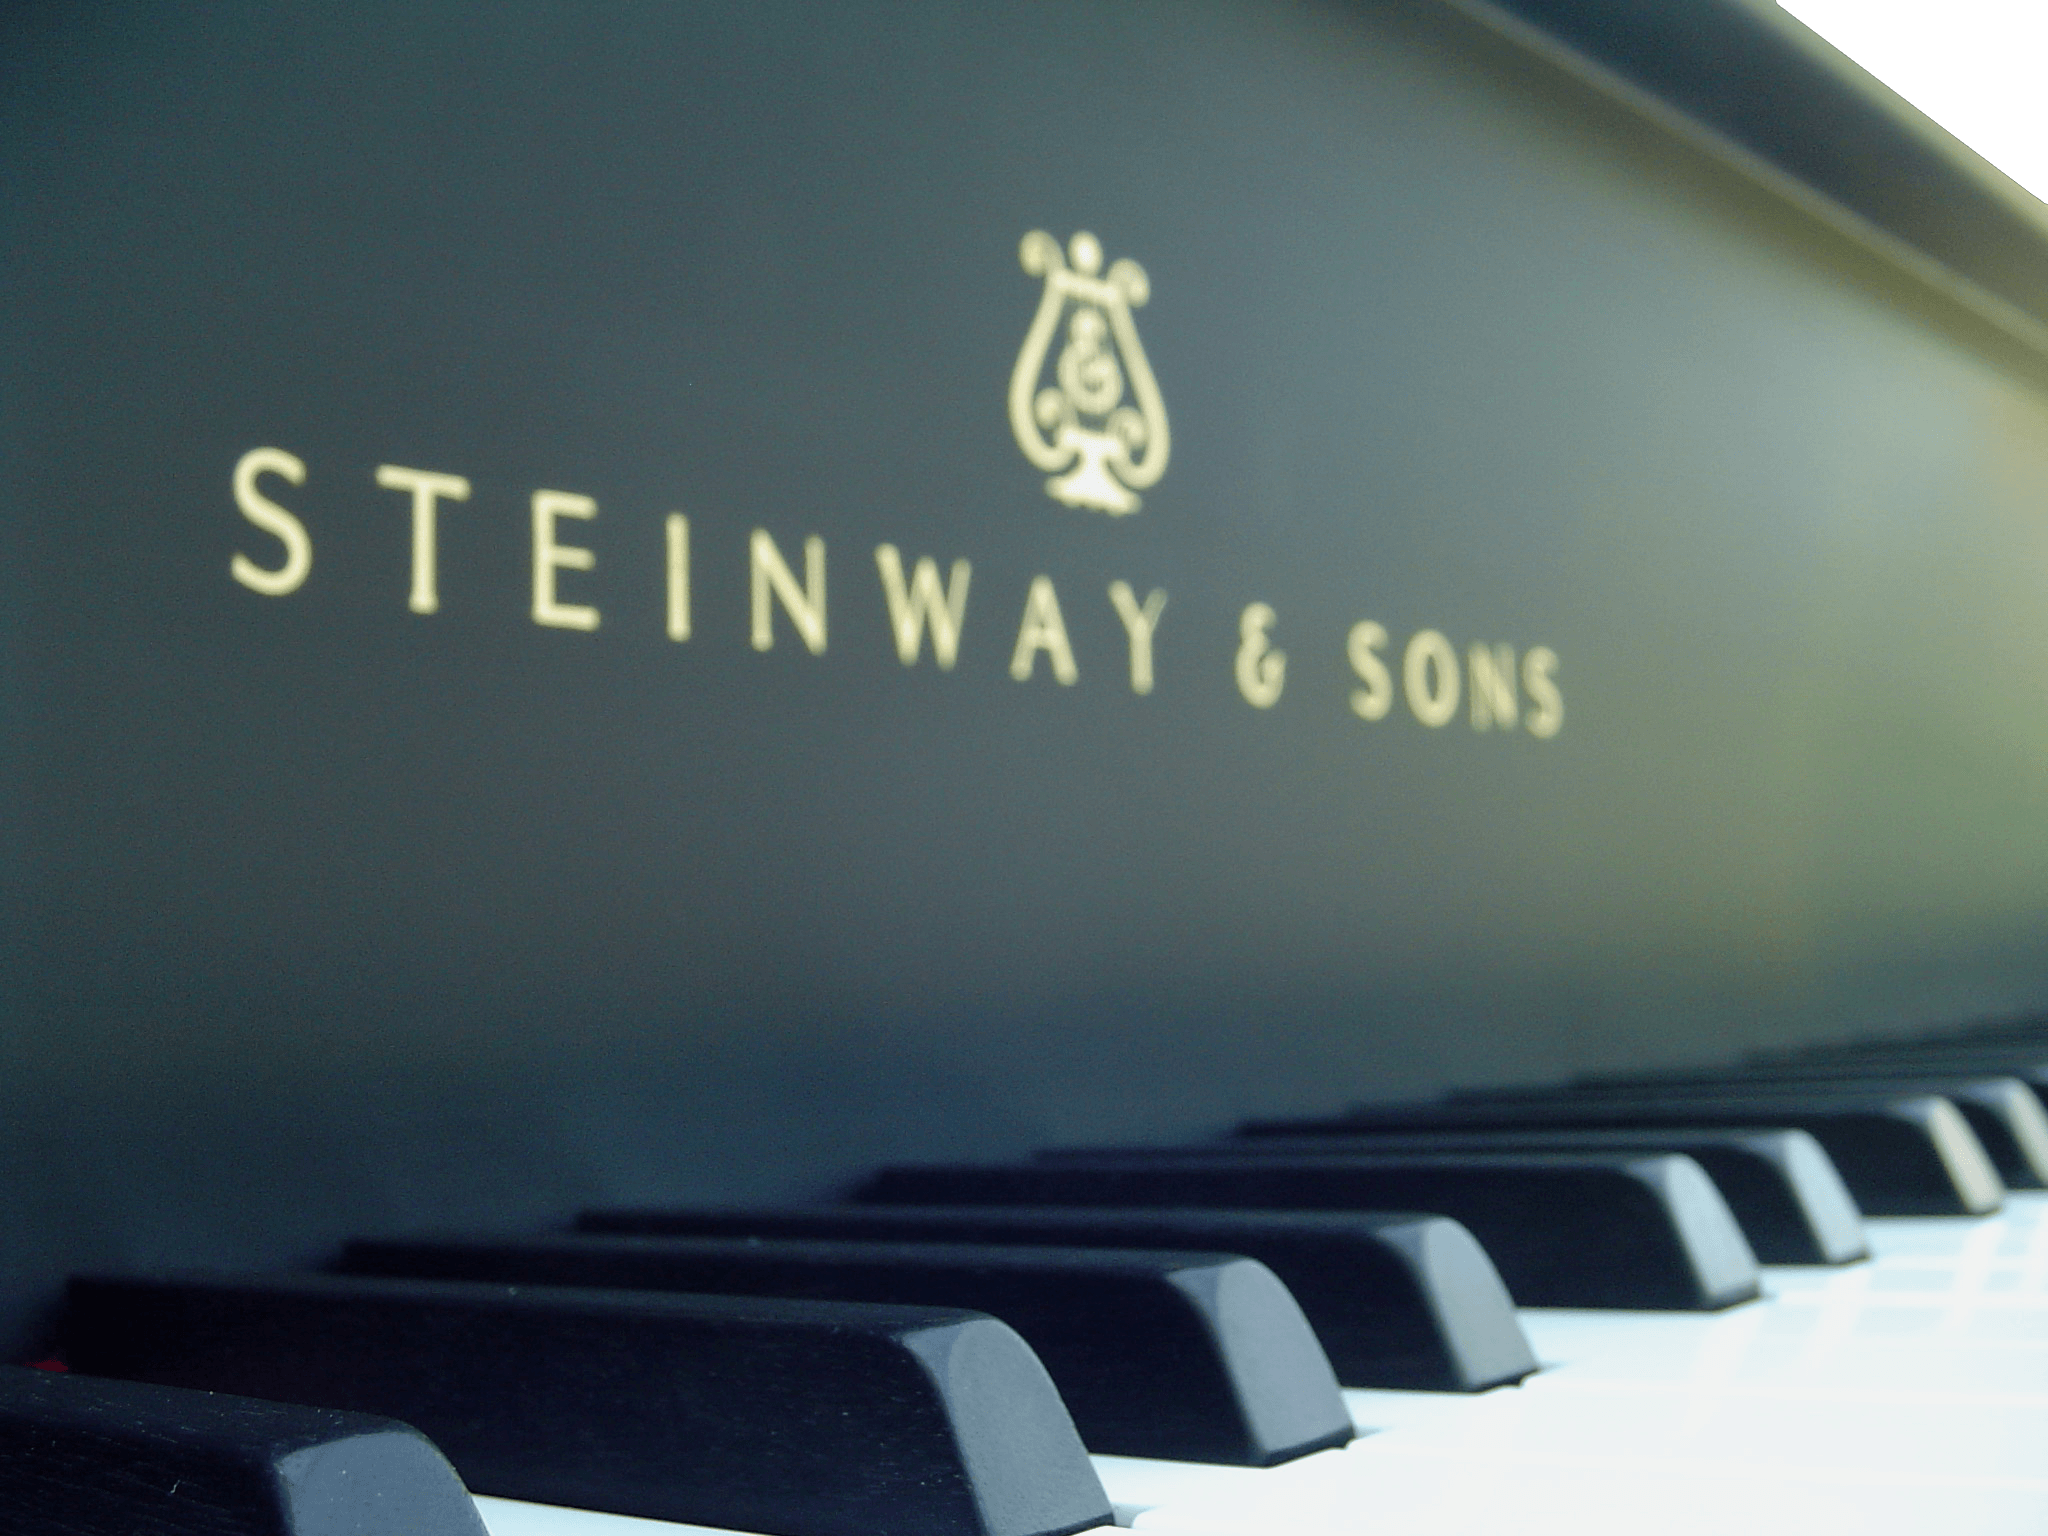 My First Purchase If I Ever Win The Lottery - Steinway Grand Piano Keys - HD Wallpaper 